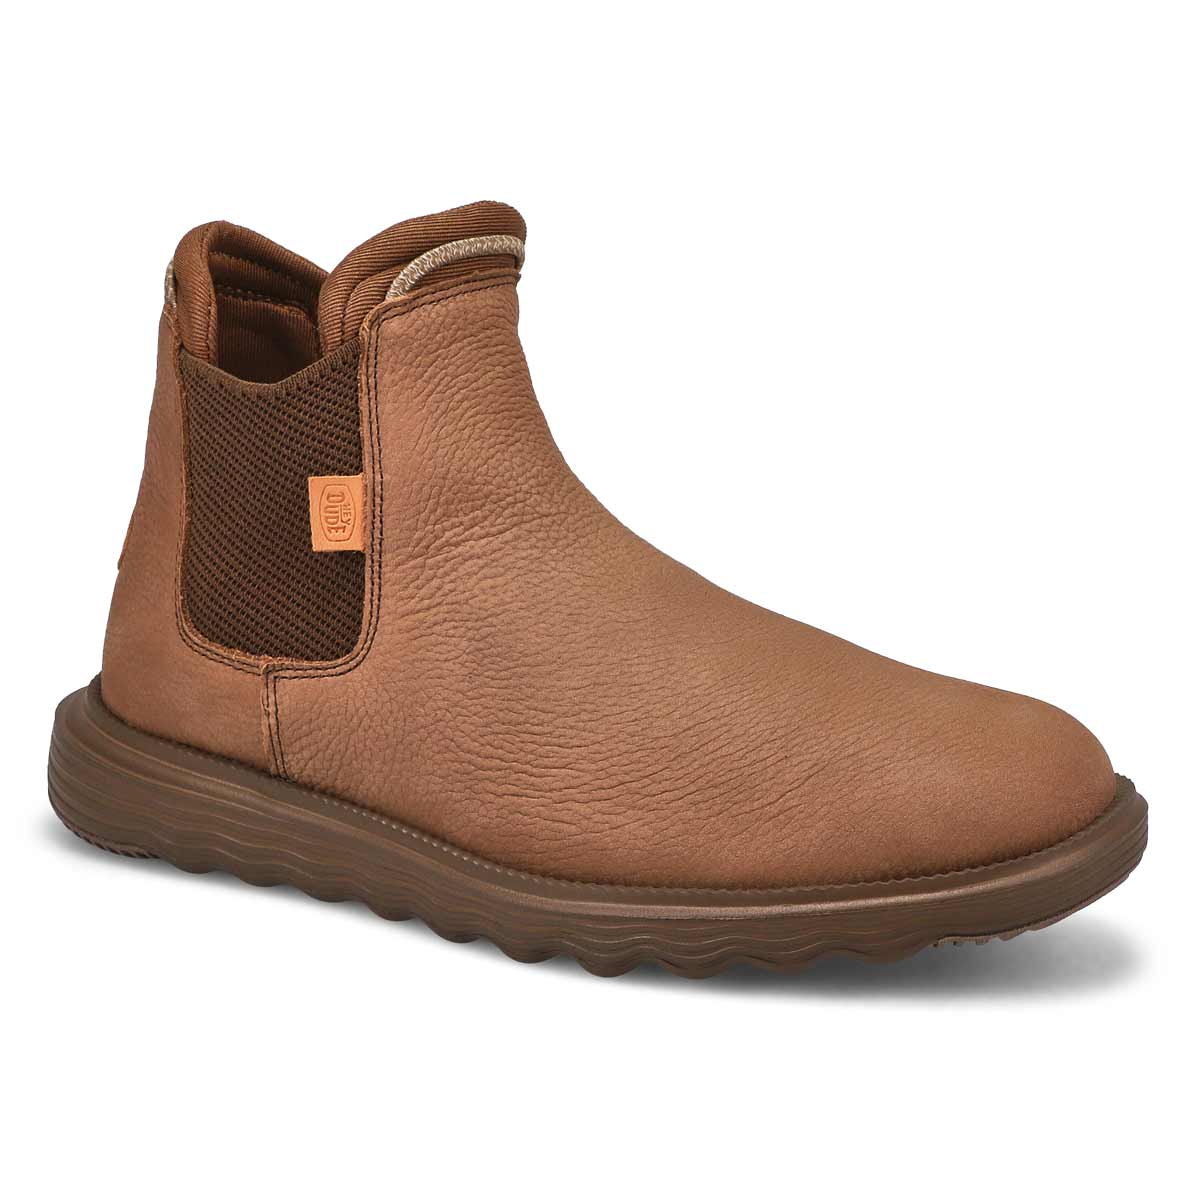 Men's Branson Craft Leather Chelsea Boot - Brown